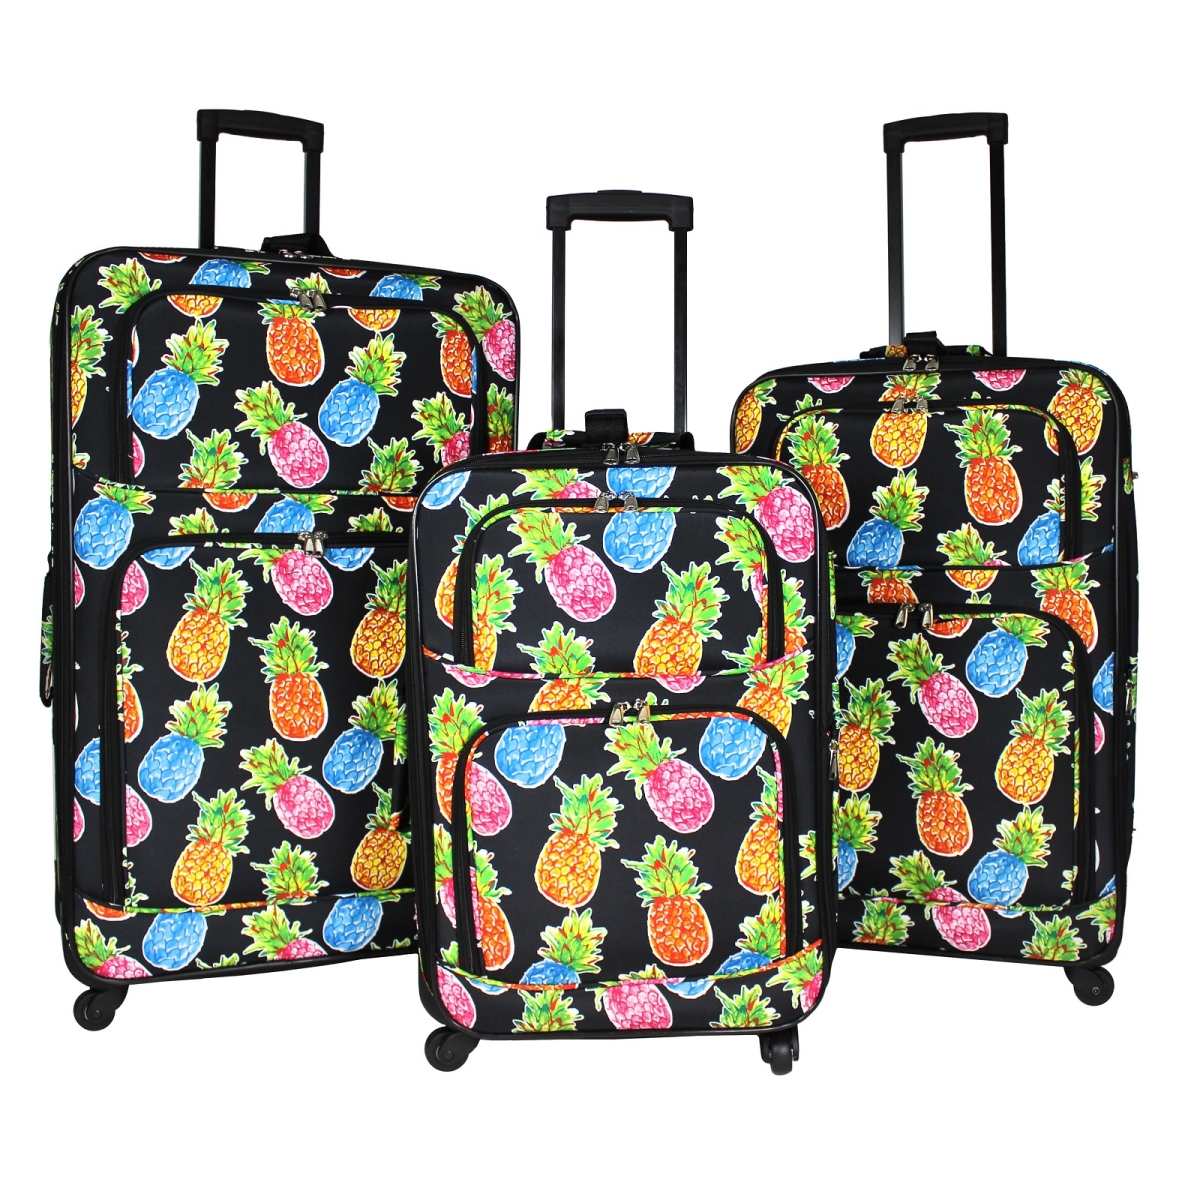 818703-239 Rolling Expandable Spinner Luggage Set, Pineapple Black - 3 Piece